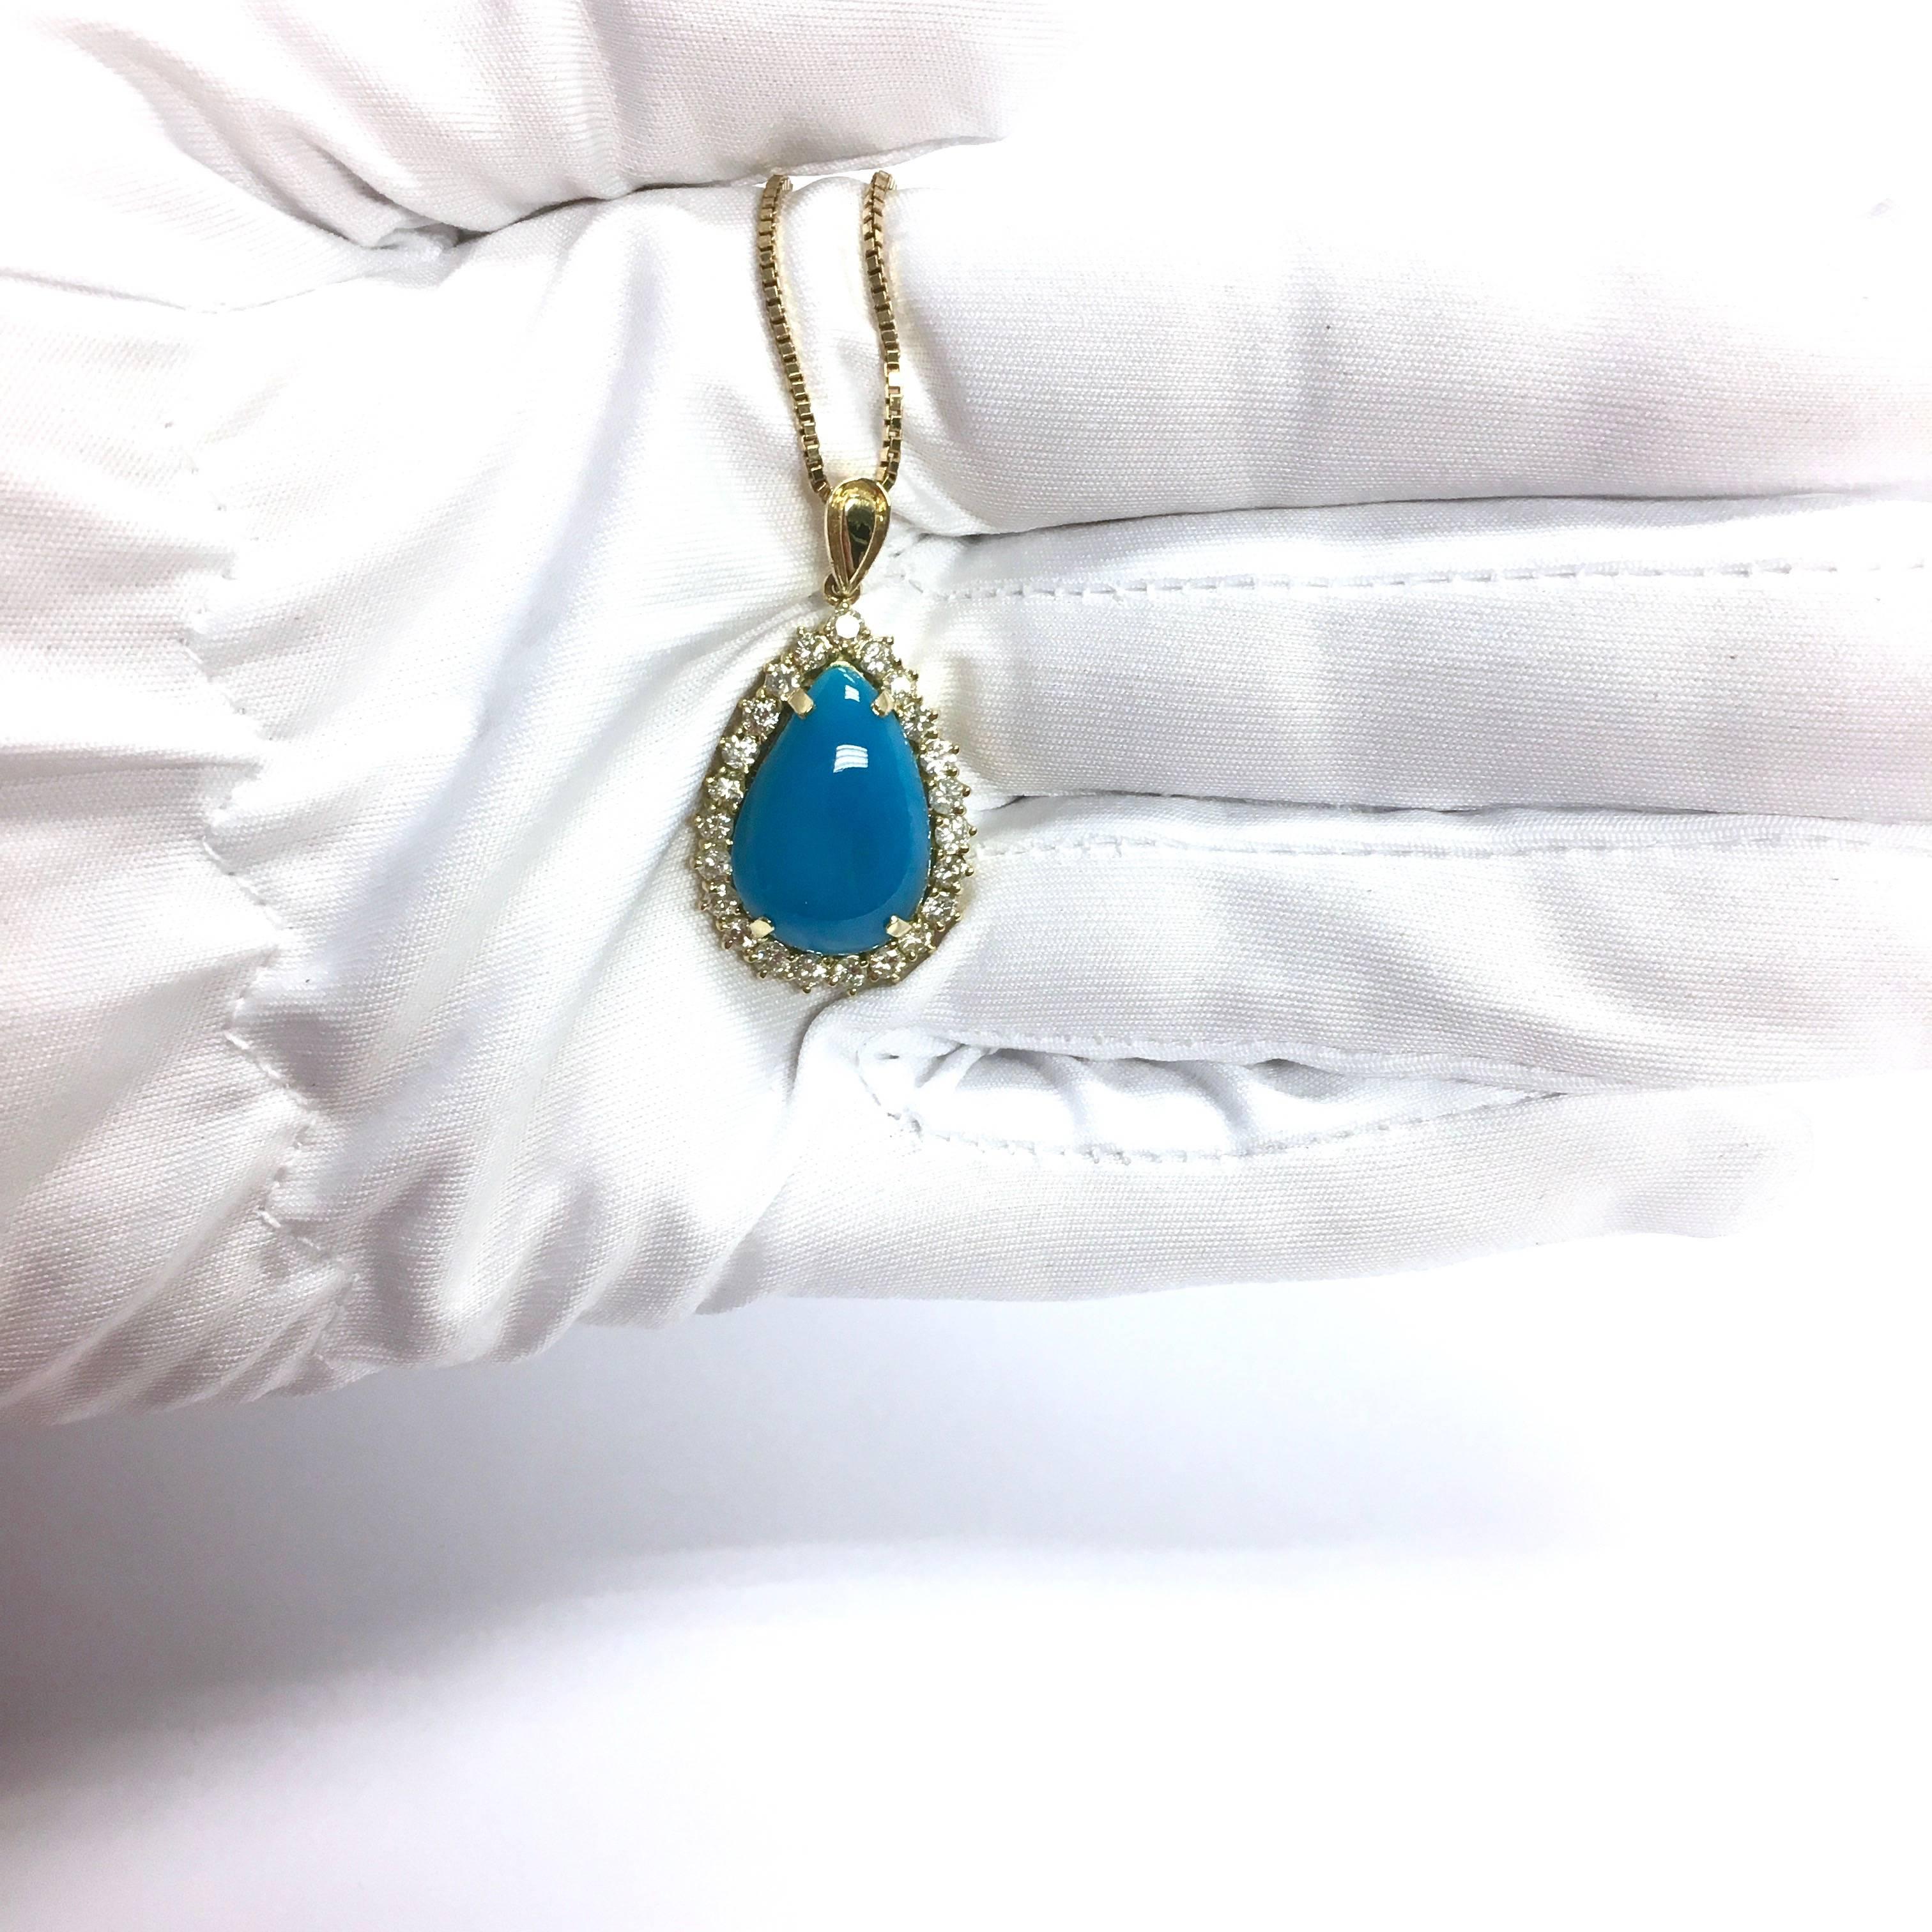 Crafted in 18K yellow gold, the peandat features a 19x13x5 mm cabochon cut GIA certified natural (no treatment) turquoise, set within a bezel of round brilliant cut diamonds, supported by a gold bail and a 20 inch length box style chain terminating